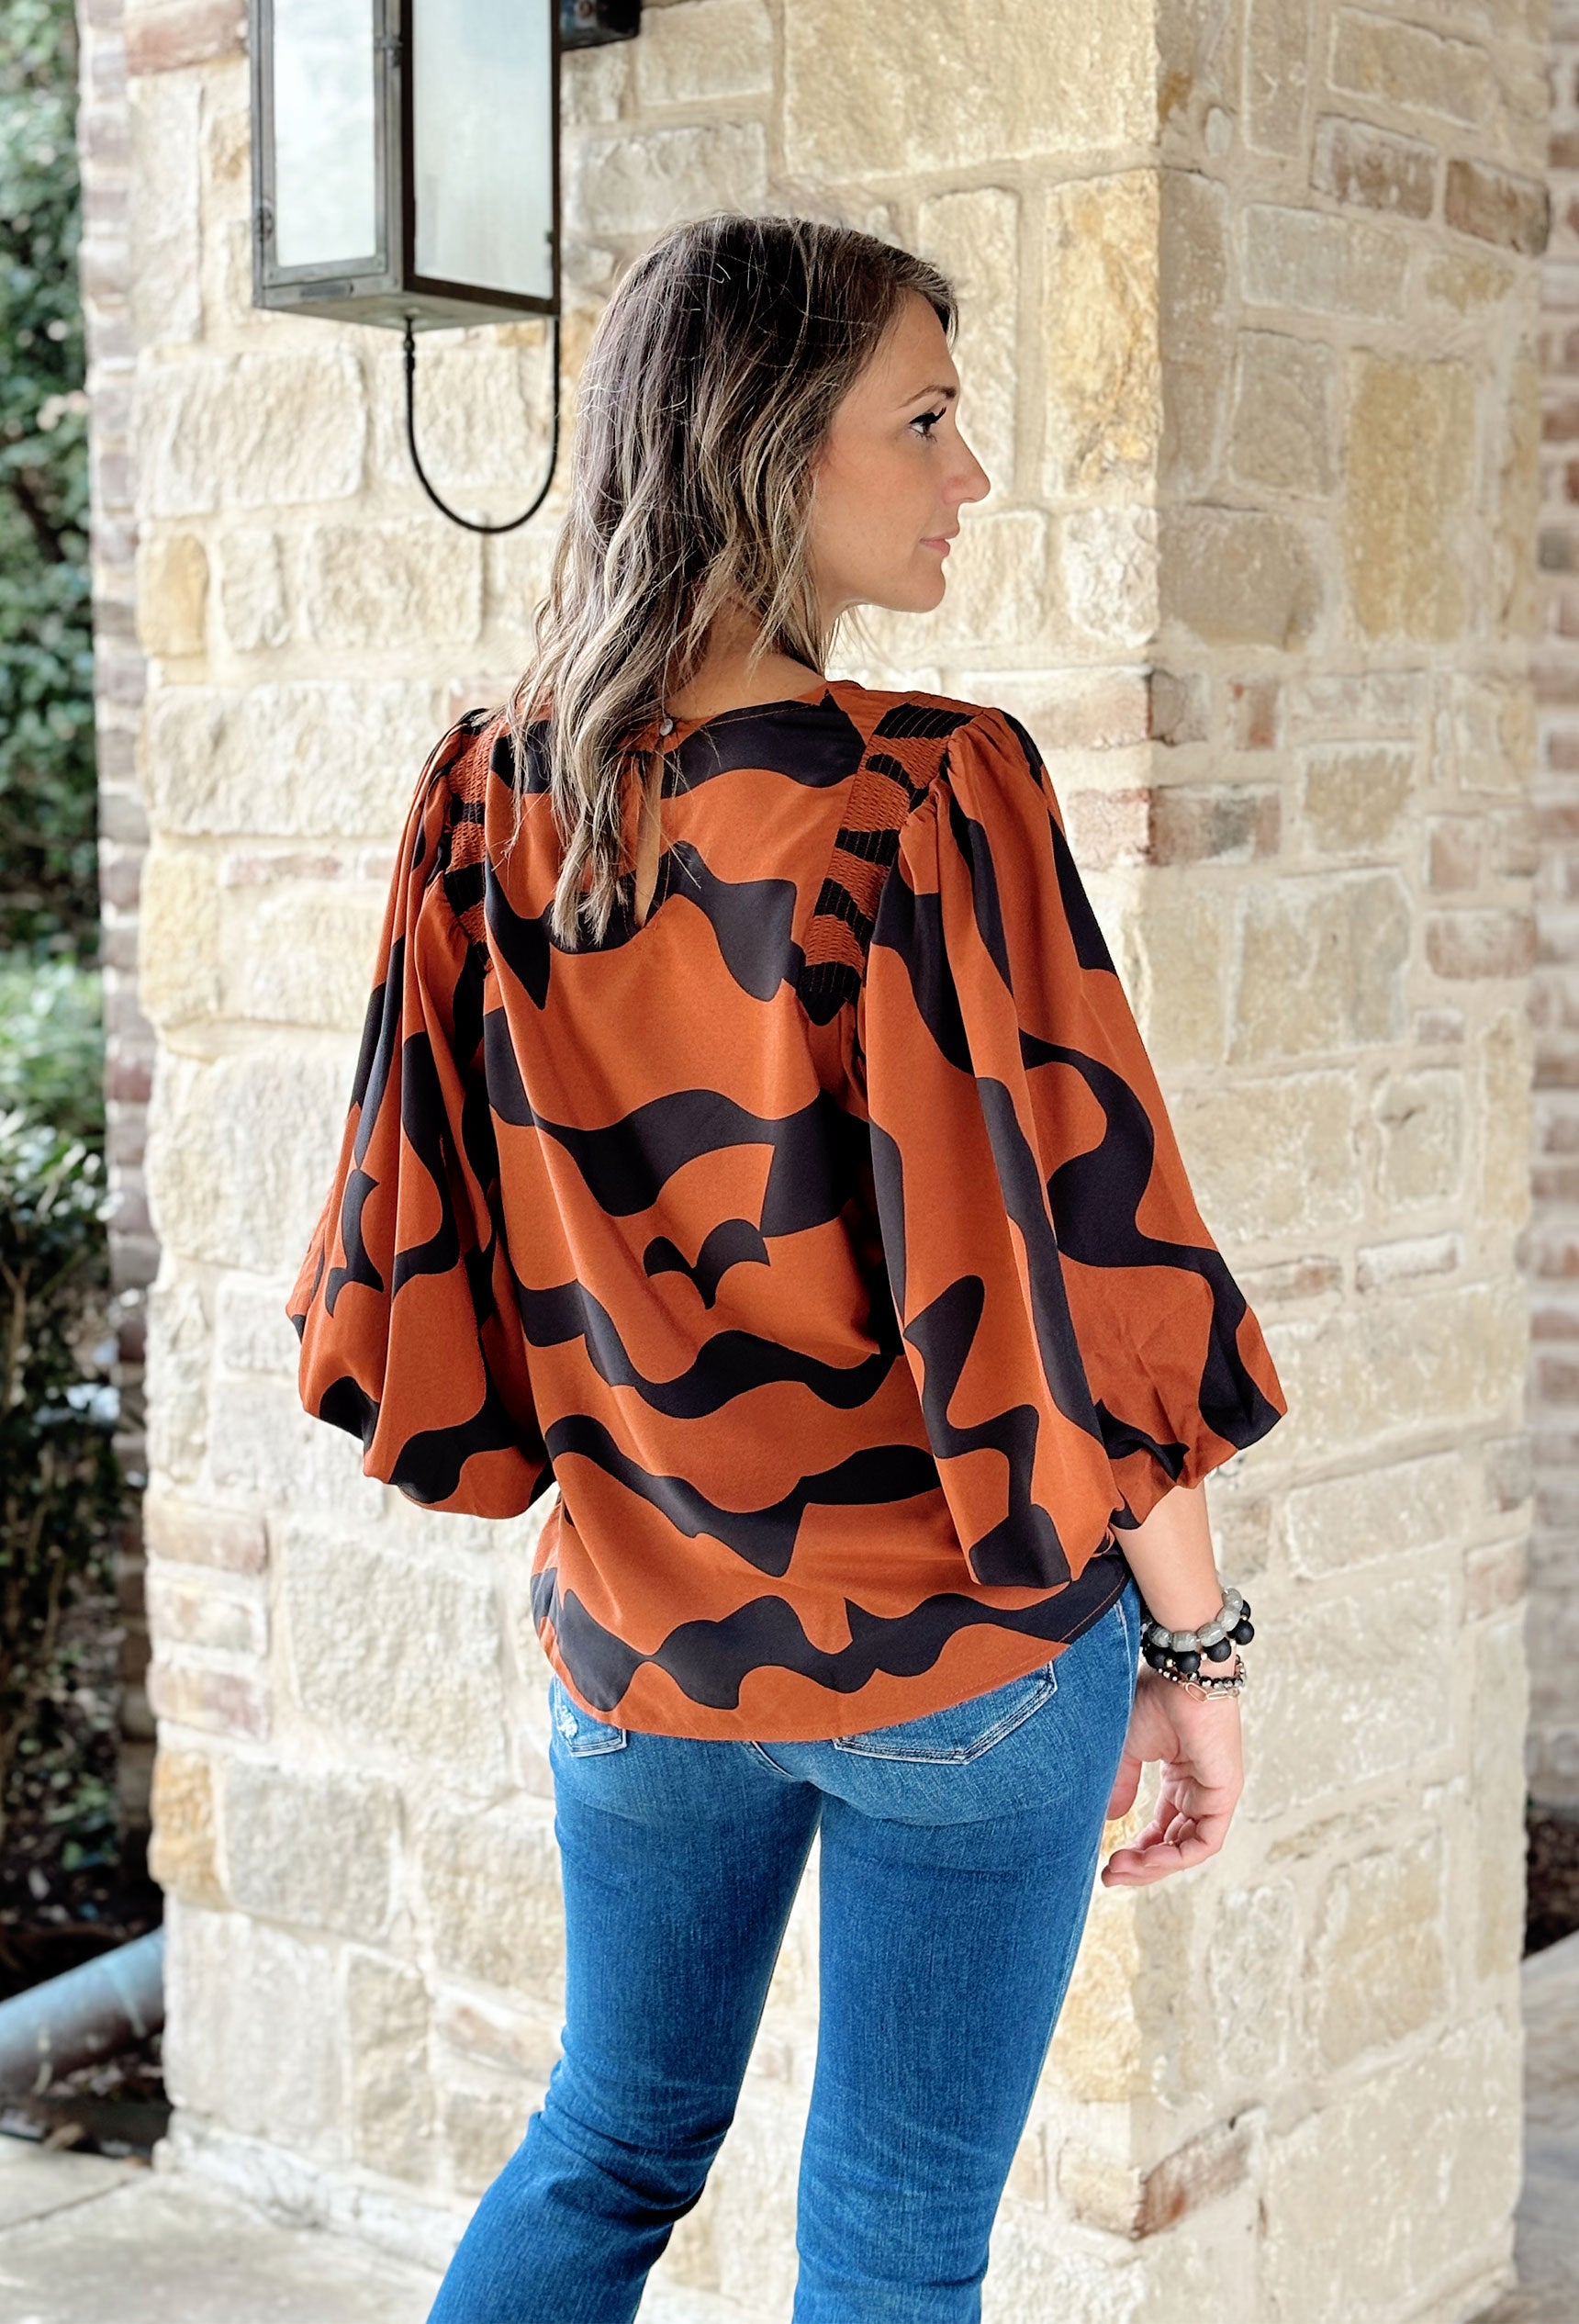 Make Your Choice Blouse, cognac and black abstract line blouse